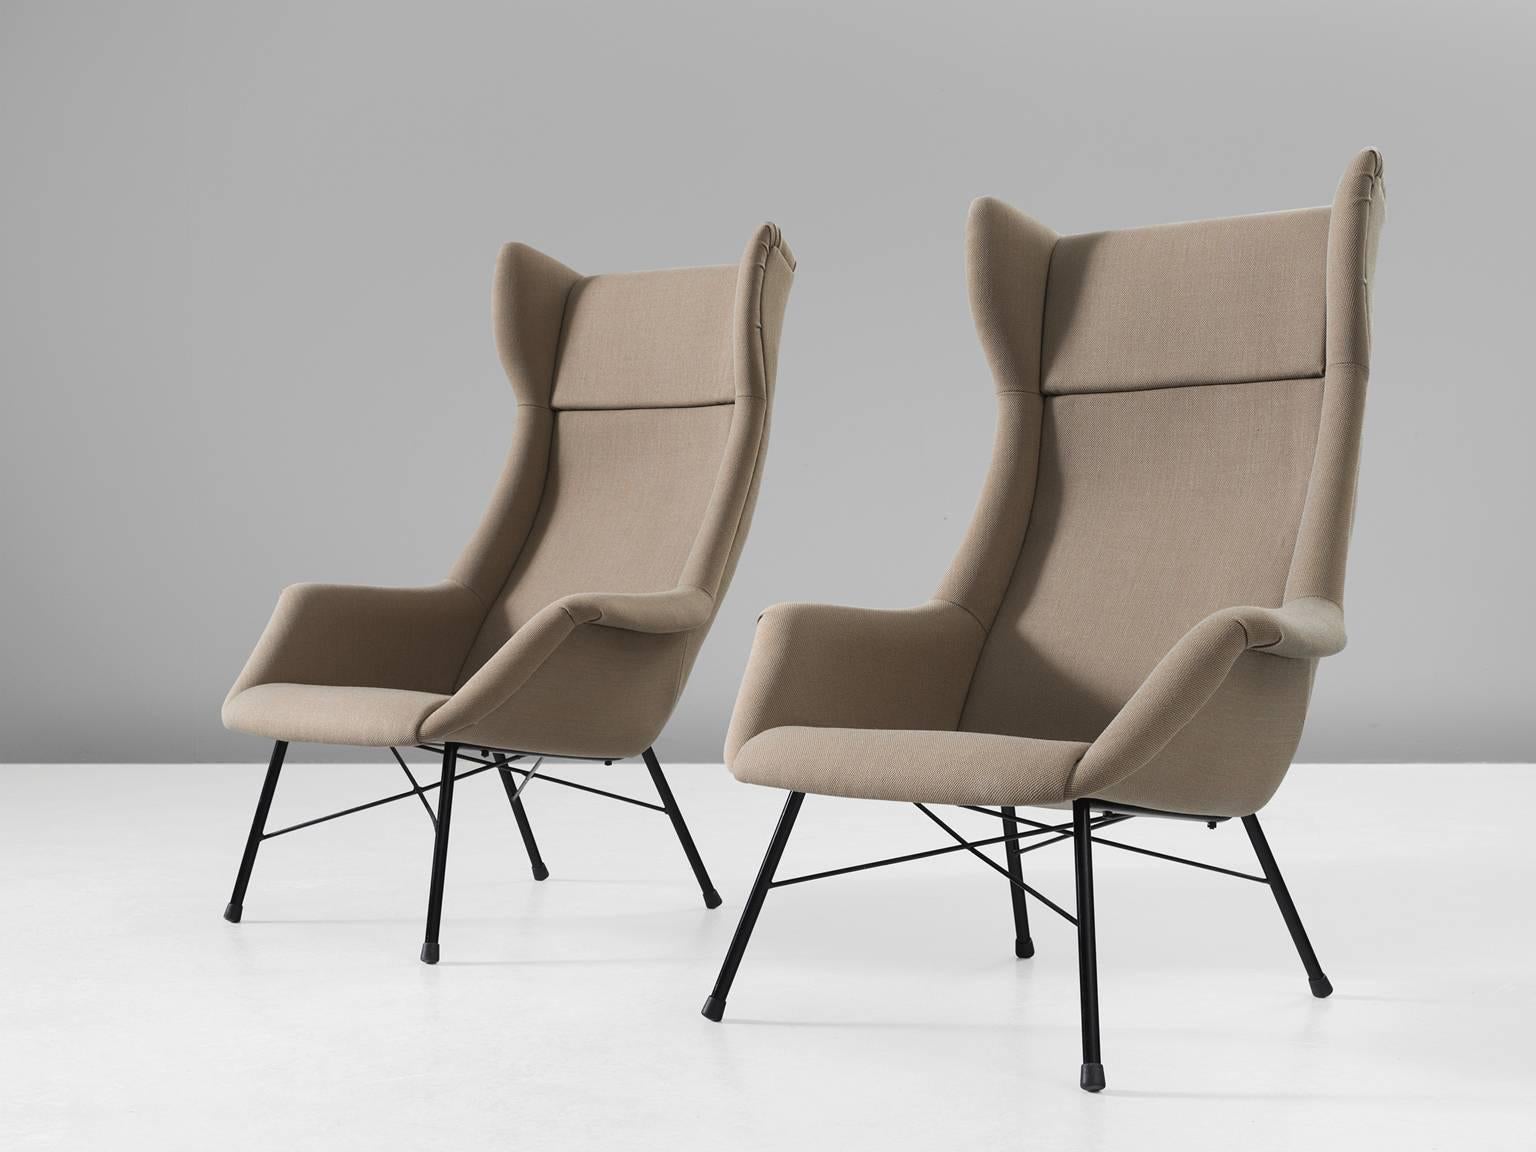 Pair of lounge chairs, in fabric and metal by Miroslav Navratil, Czech Republic, 1960s. 

Modern set of two high back lounge chairs. These chairs have a beautiful shaped shell and interesting metal frame. The shell shows beautiful lines and angles.